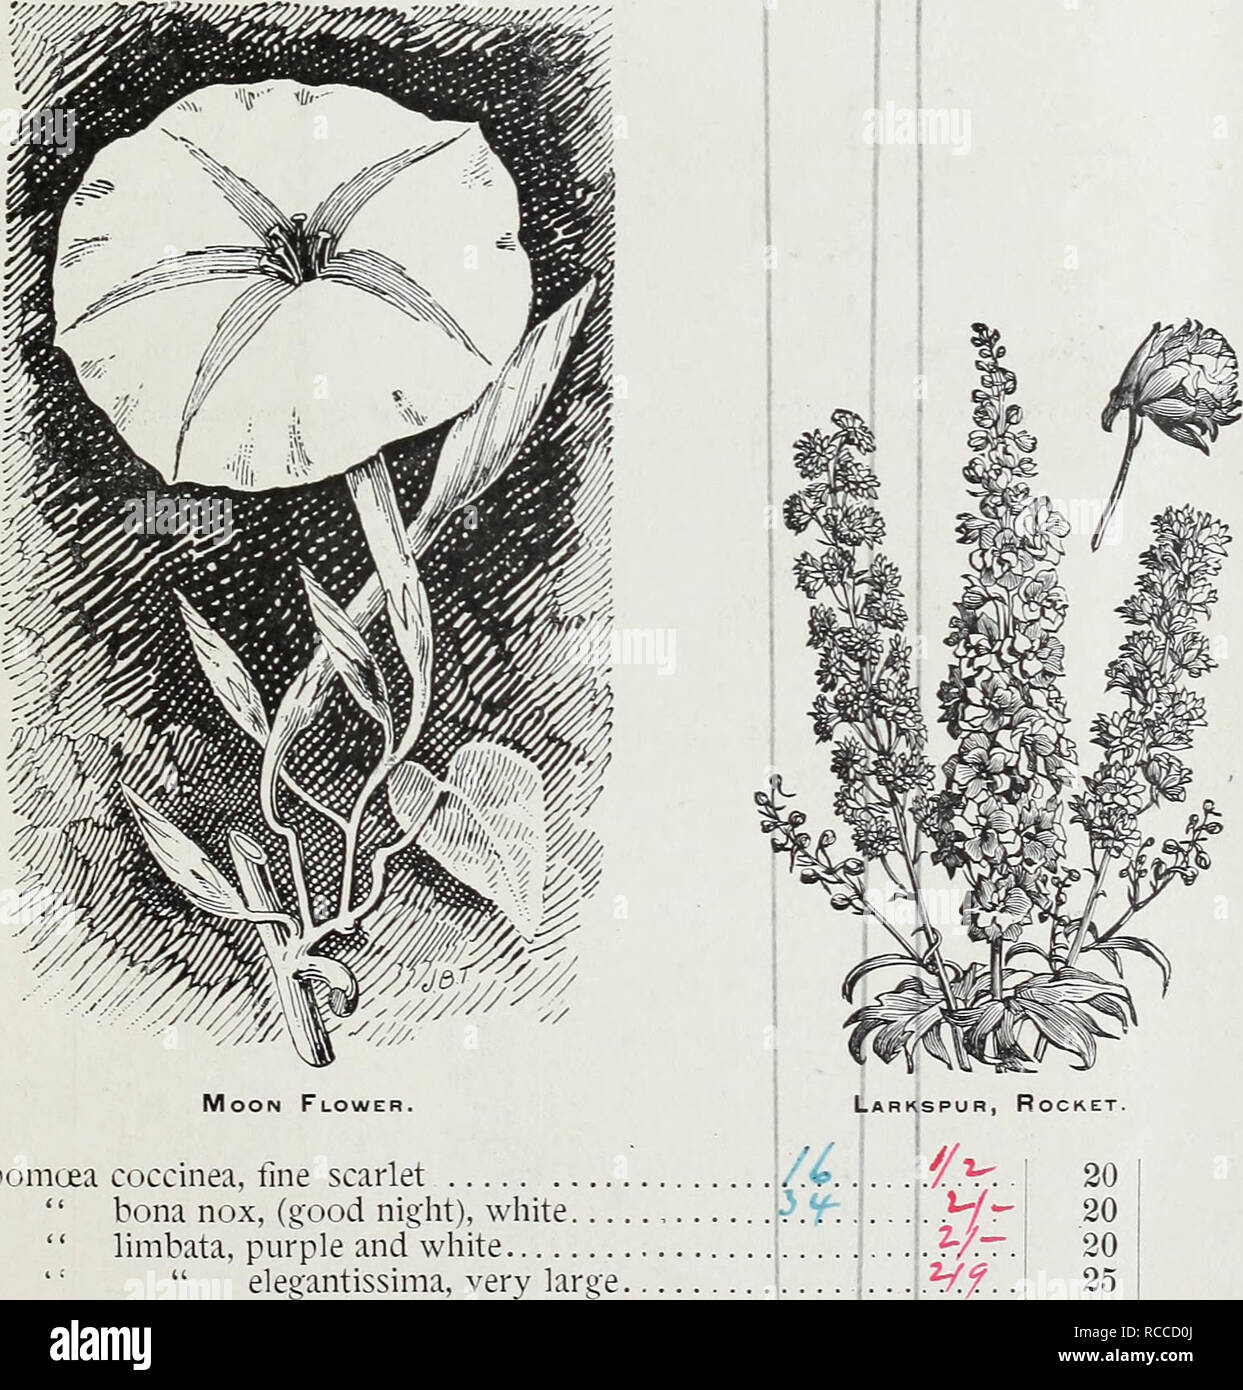 . D. M. Ferry &amp; Co's wholesale list of seeds for 1892. Seed industry and trade Michigan Detroit; Vegetables Seeds; Fruit Seeds; Agricultural implements; Flowers Seeds. CX^iZLvo ^^^^n^vy^ ^y- D. M. FERRY &amp; COS WHOLESALE PRICE LIST Hibiscus Africanus Hollyhock, Double White, finest strain &quot; â¢â¢ Canary Yellow, finest strain. Rose, finest strain , Salmon, &quot; Crimson, ' â Choicest mixed..% mixed Honesty, or Satin Flower, (Lunaria biennis) Hyacinth Bean, Purple, (Dolichos lablab) '' White, &quot; &quot; mixed. iM .i-.i. 11 39 PER OZ. PER LB. 0 15 1 50 1 50 2 GO 2 00 2 00 1 00 50 25 Stock Photo